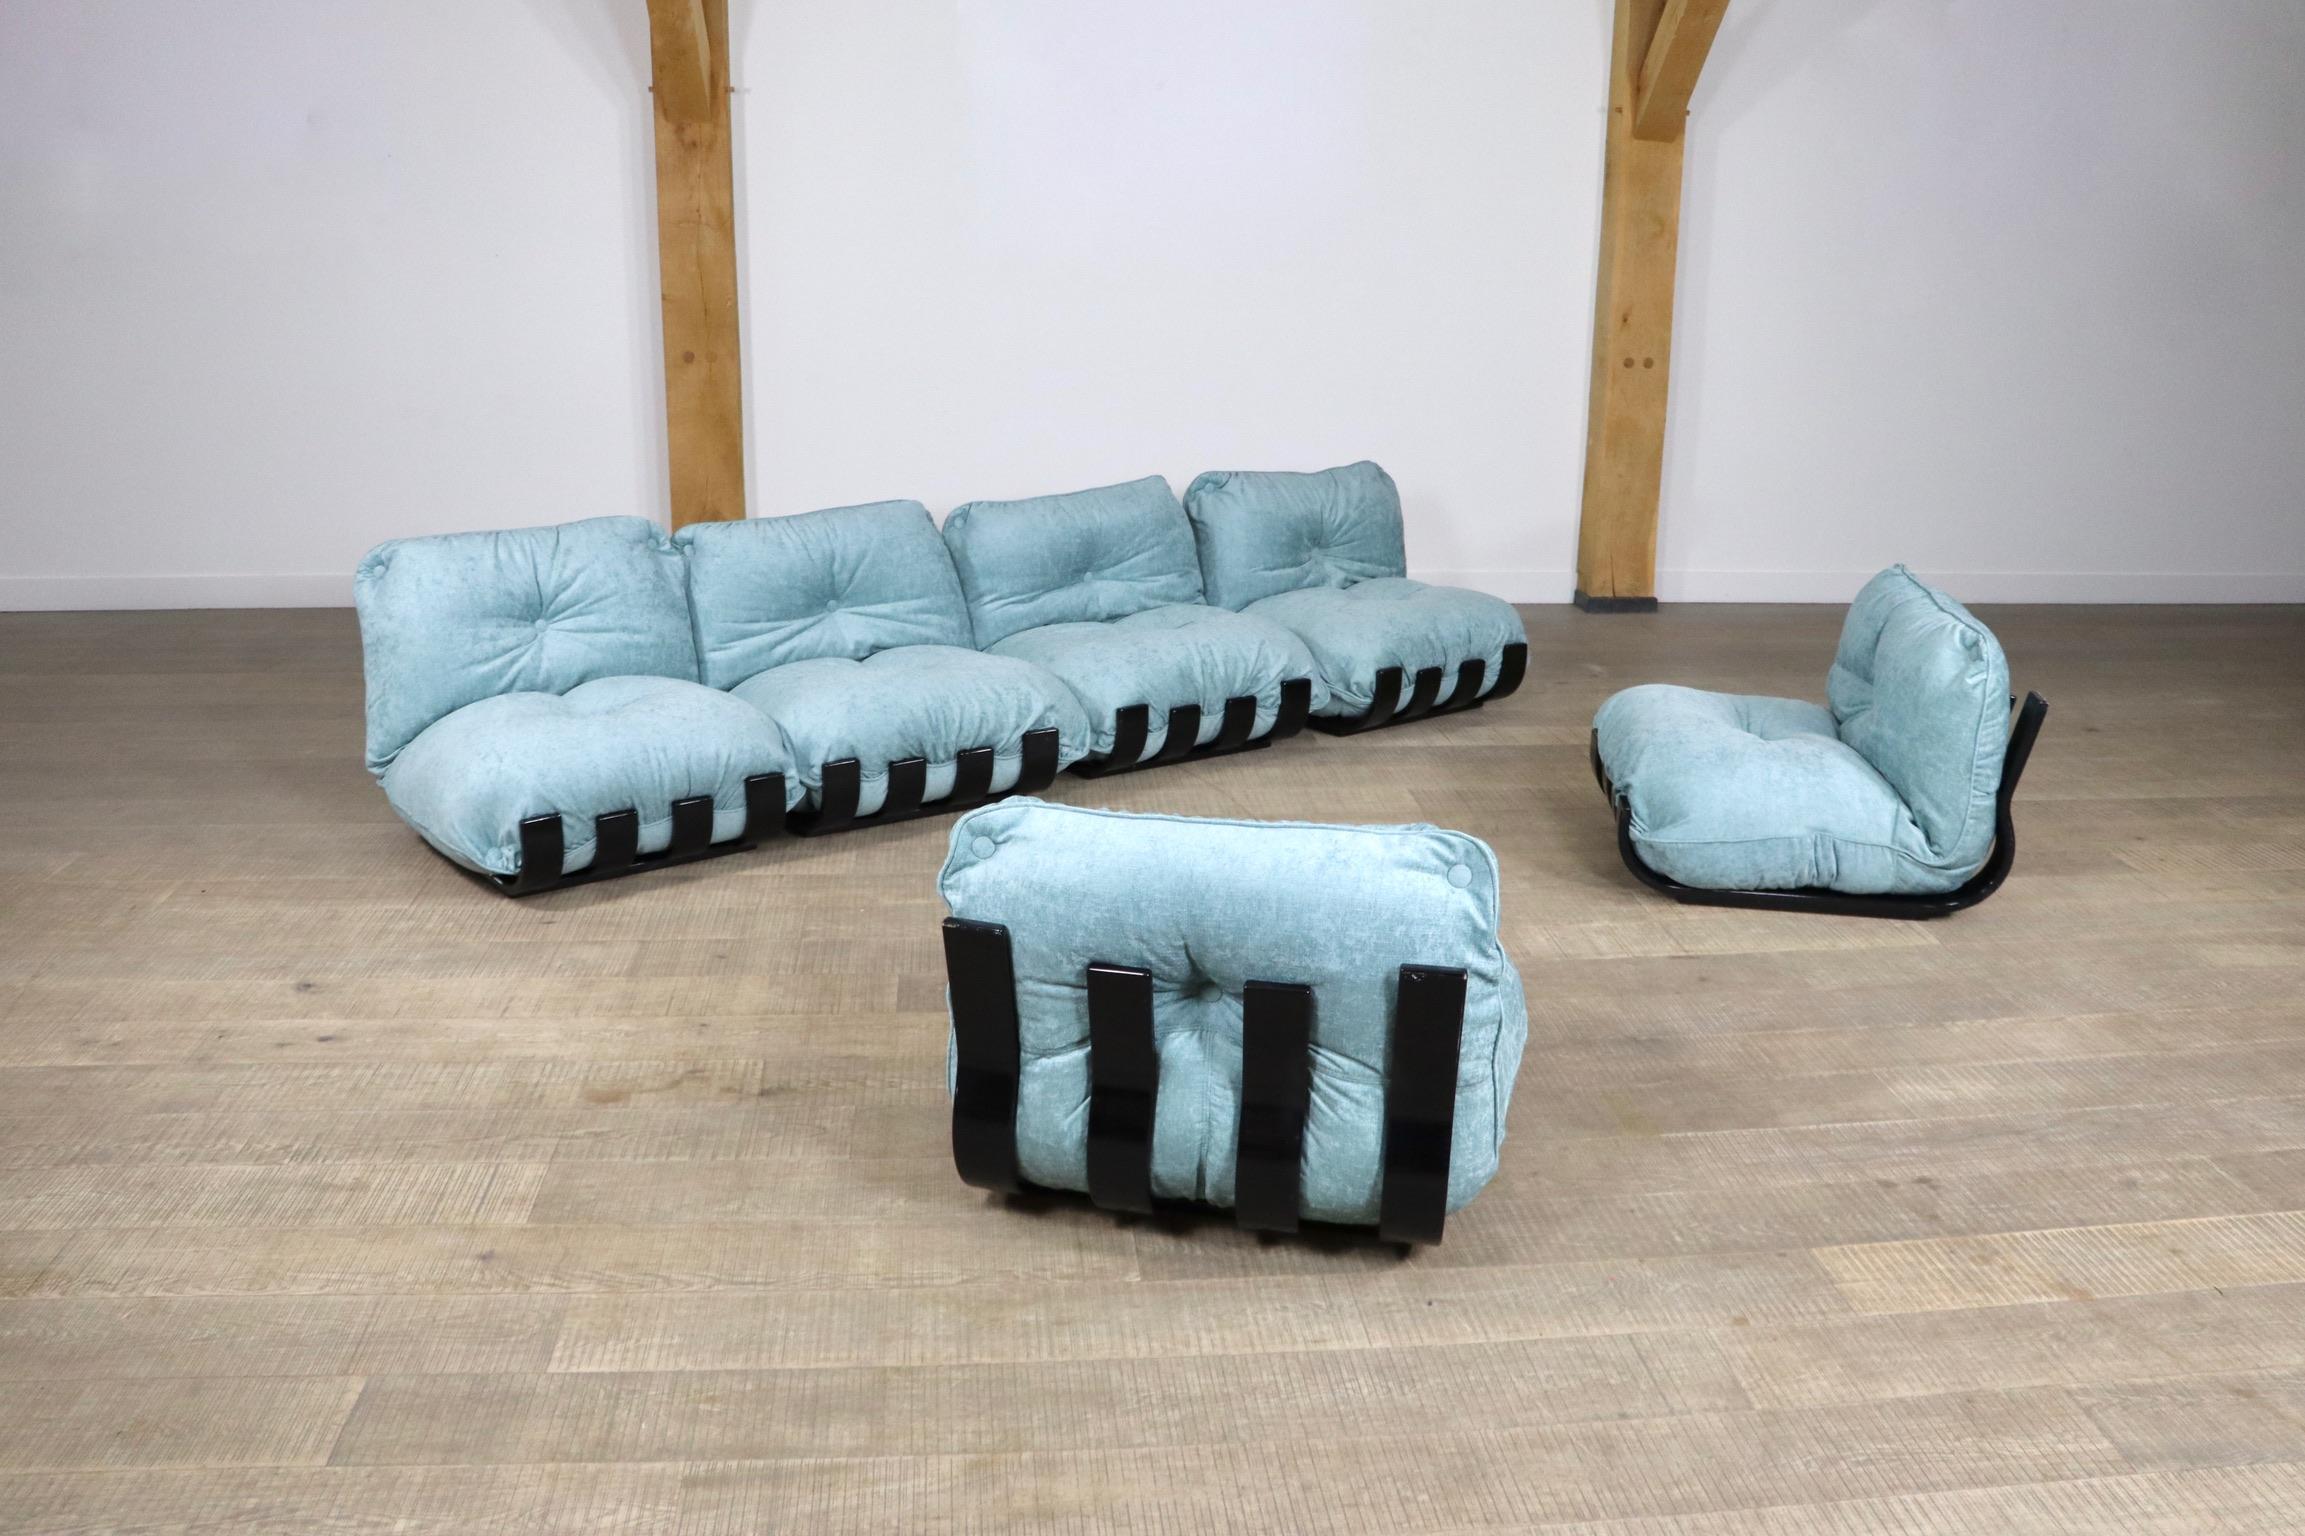 Sectional Gran Visir Sofa in Blue Velvet by Luciano Frigerio, Italy, 1970s For Sale 5